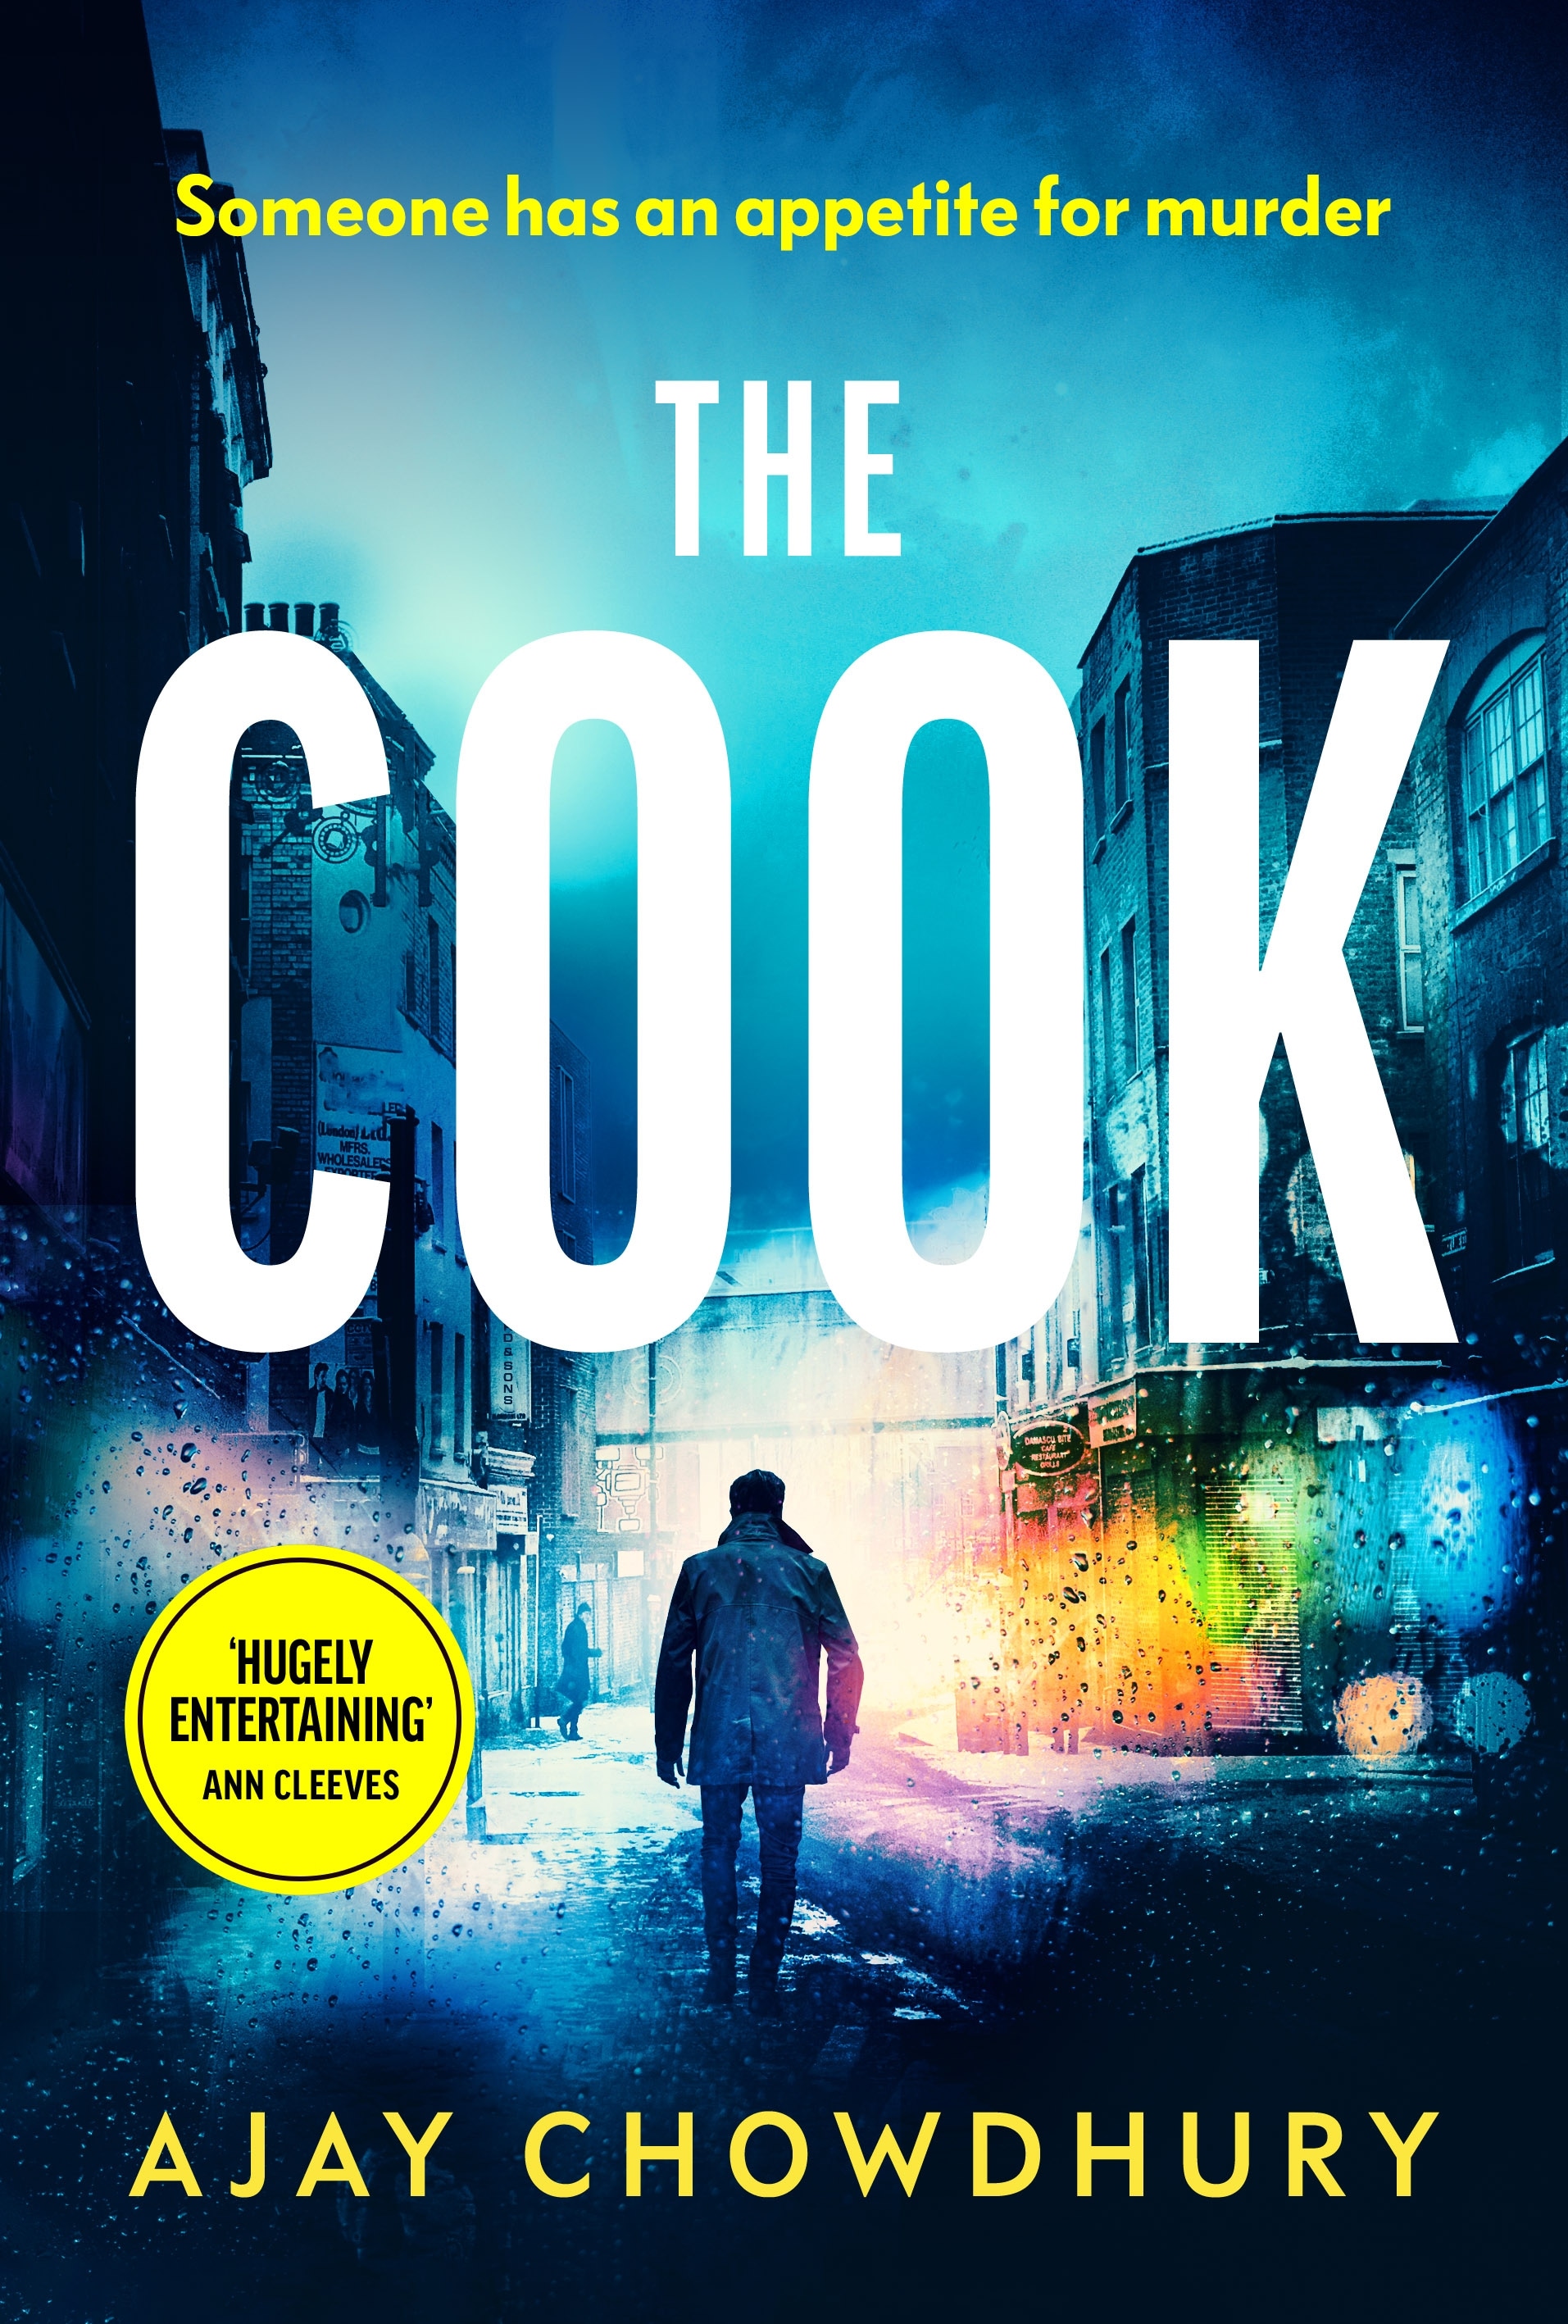 Book “The Cook” by Ajay Chowdhury — May 5, 2022